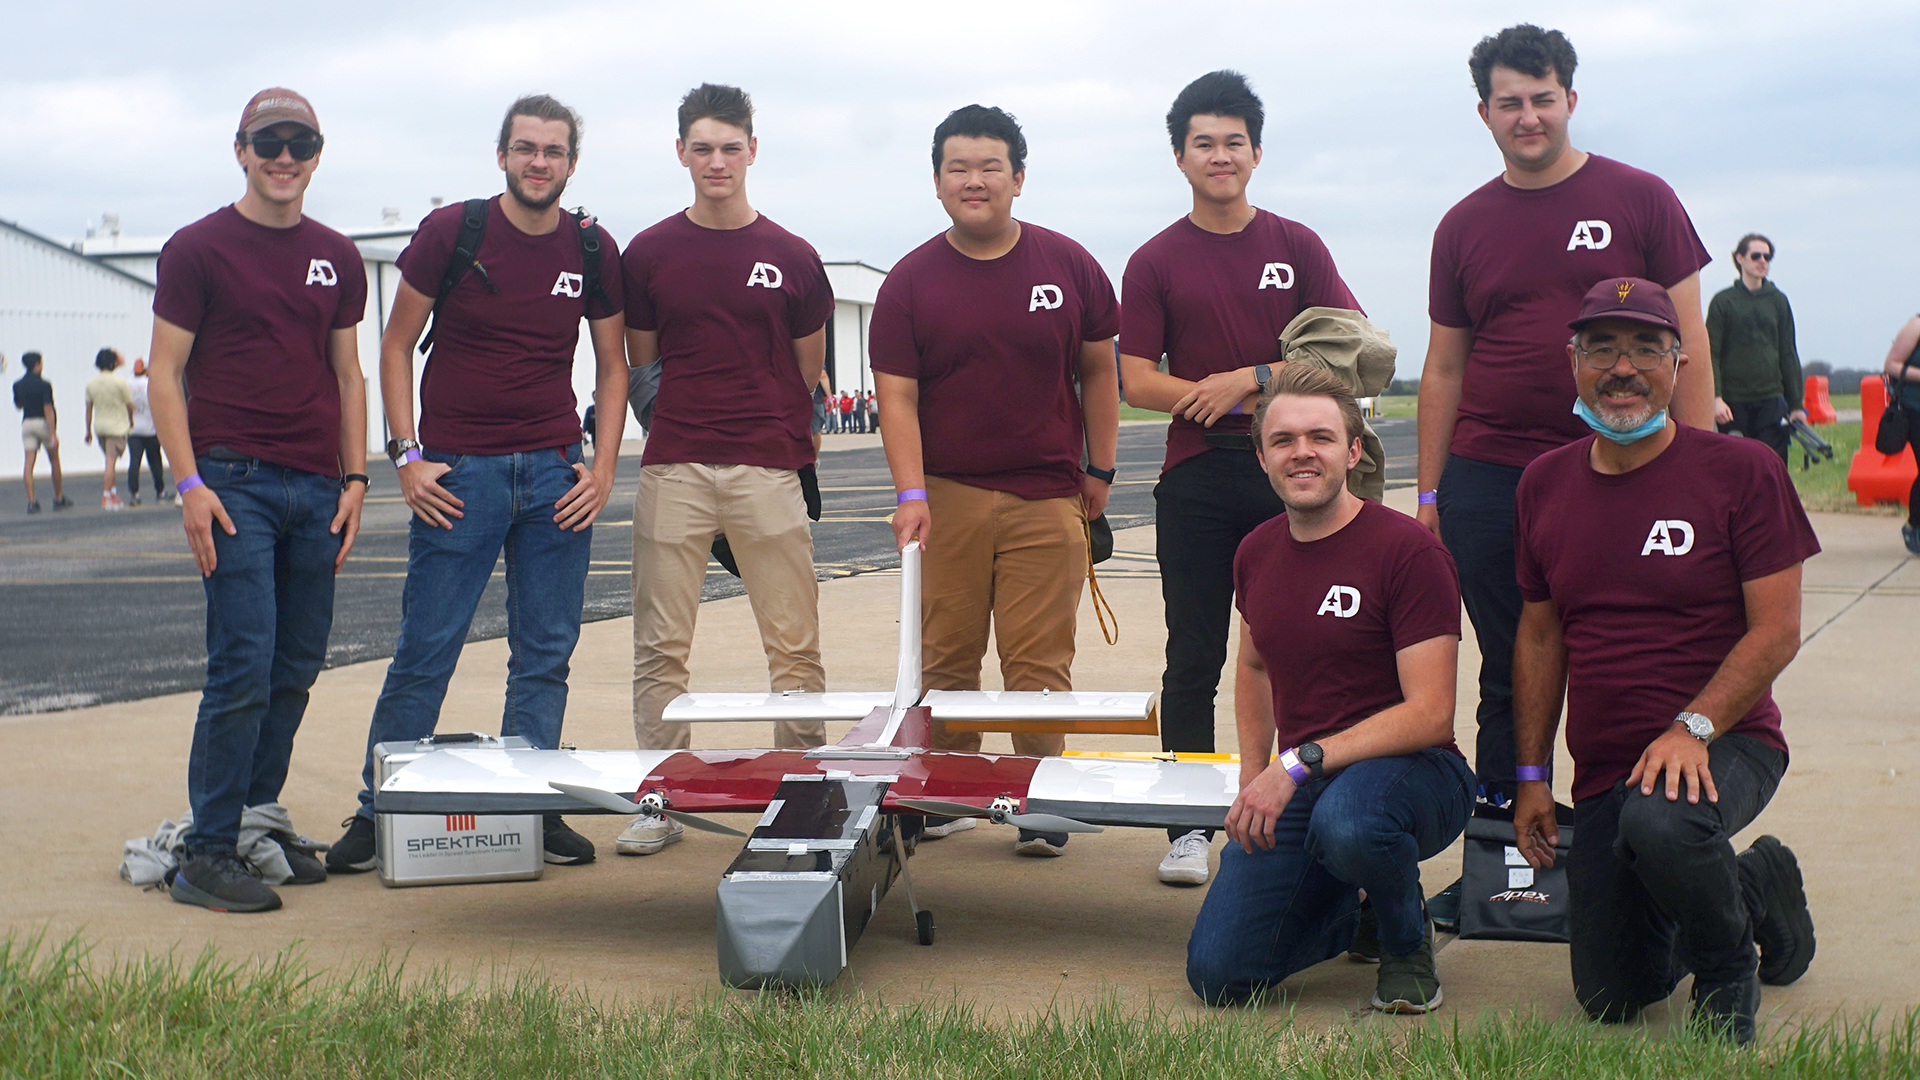 AirDevils students with their plane